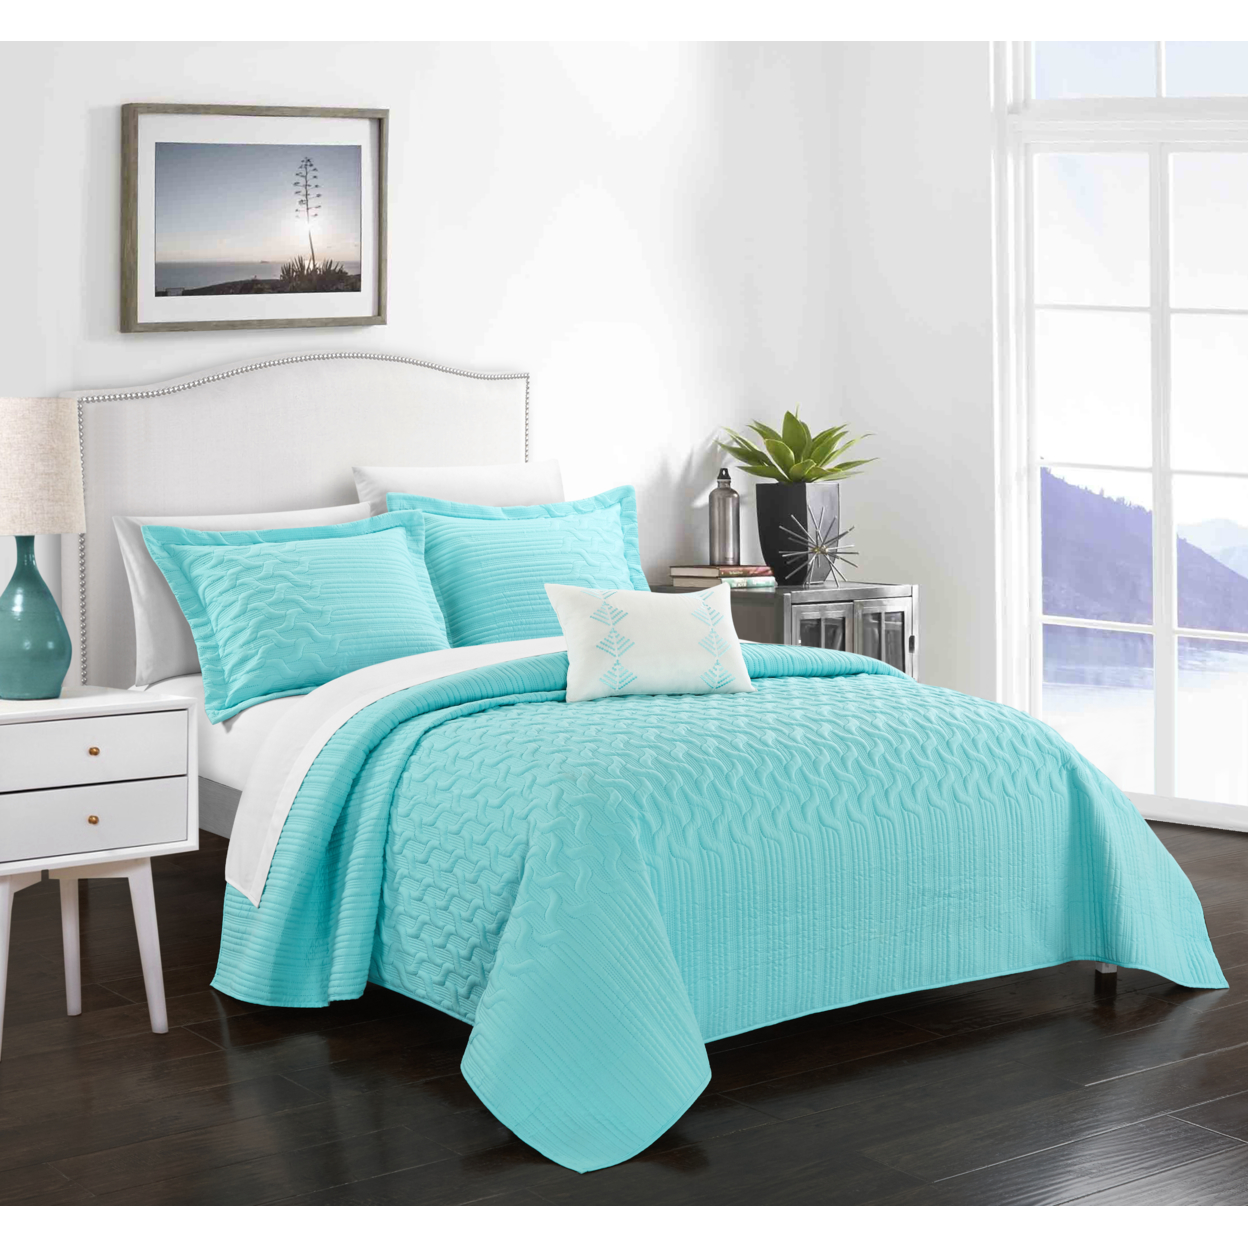 Shaliya 4 Or 3 Piece Quilt Cover Set Interlaced Vine Pattern Quilted Bed In A Bag - Aqua, Queen